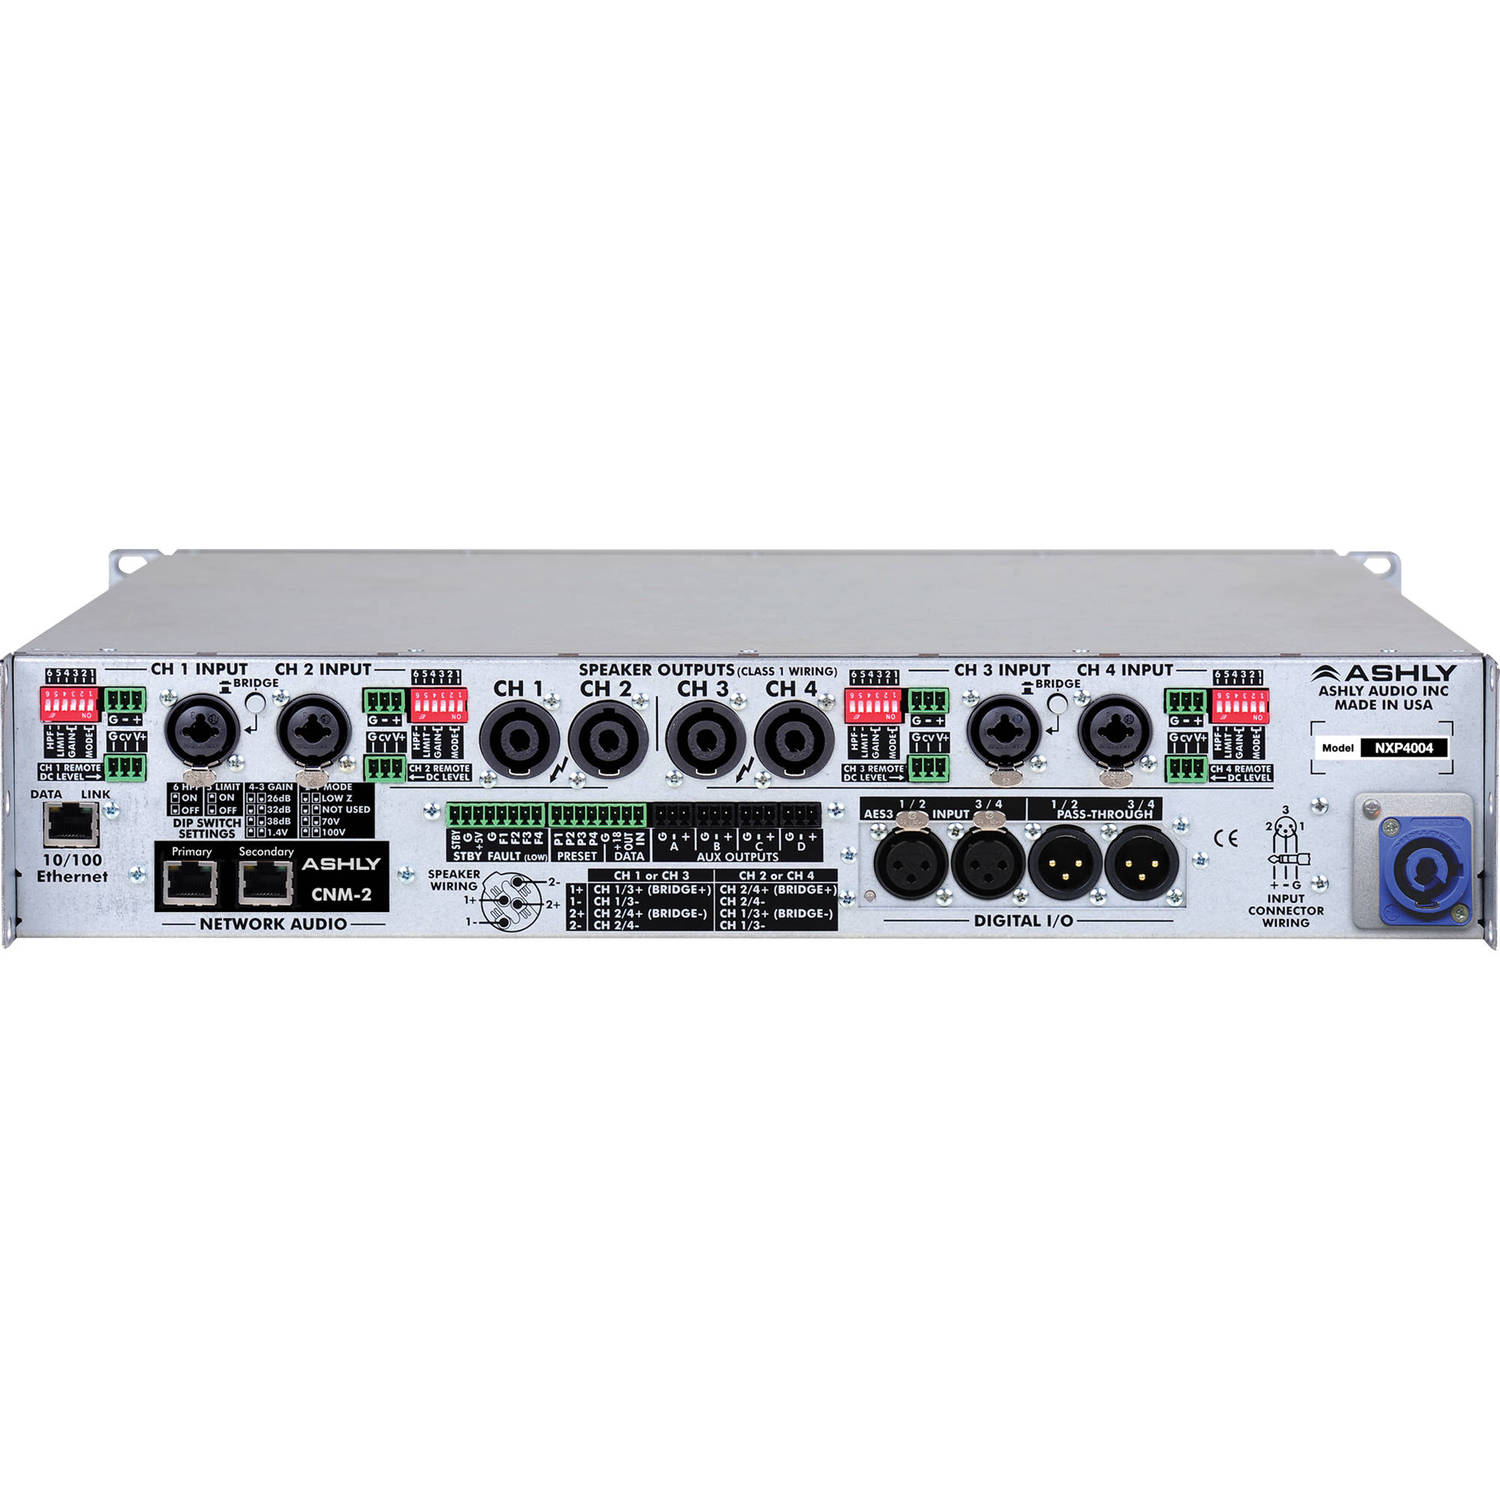 Ashly nXp4004 4-Channel Network Power Amplifier, 400W at 2 Ohms with Protea DSP